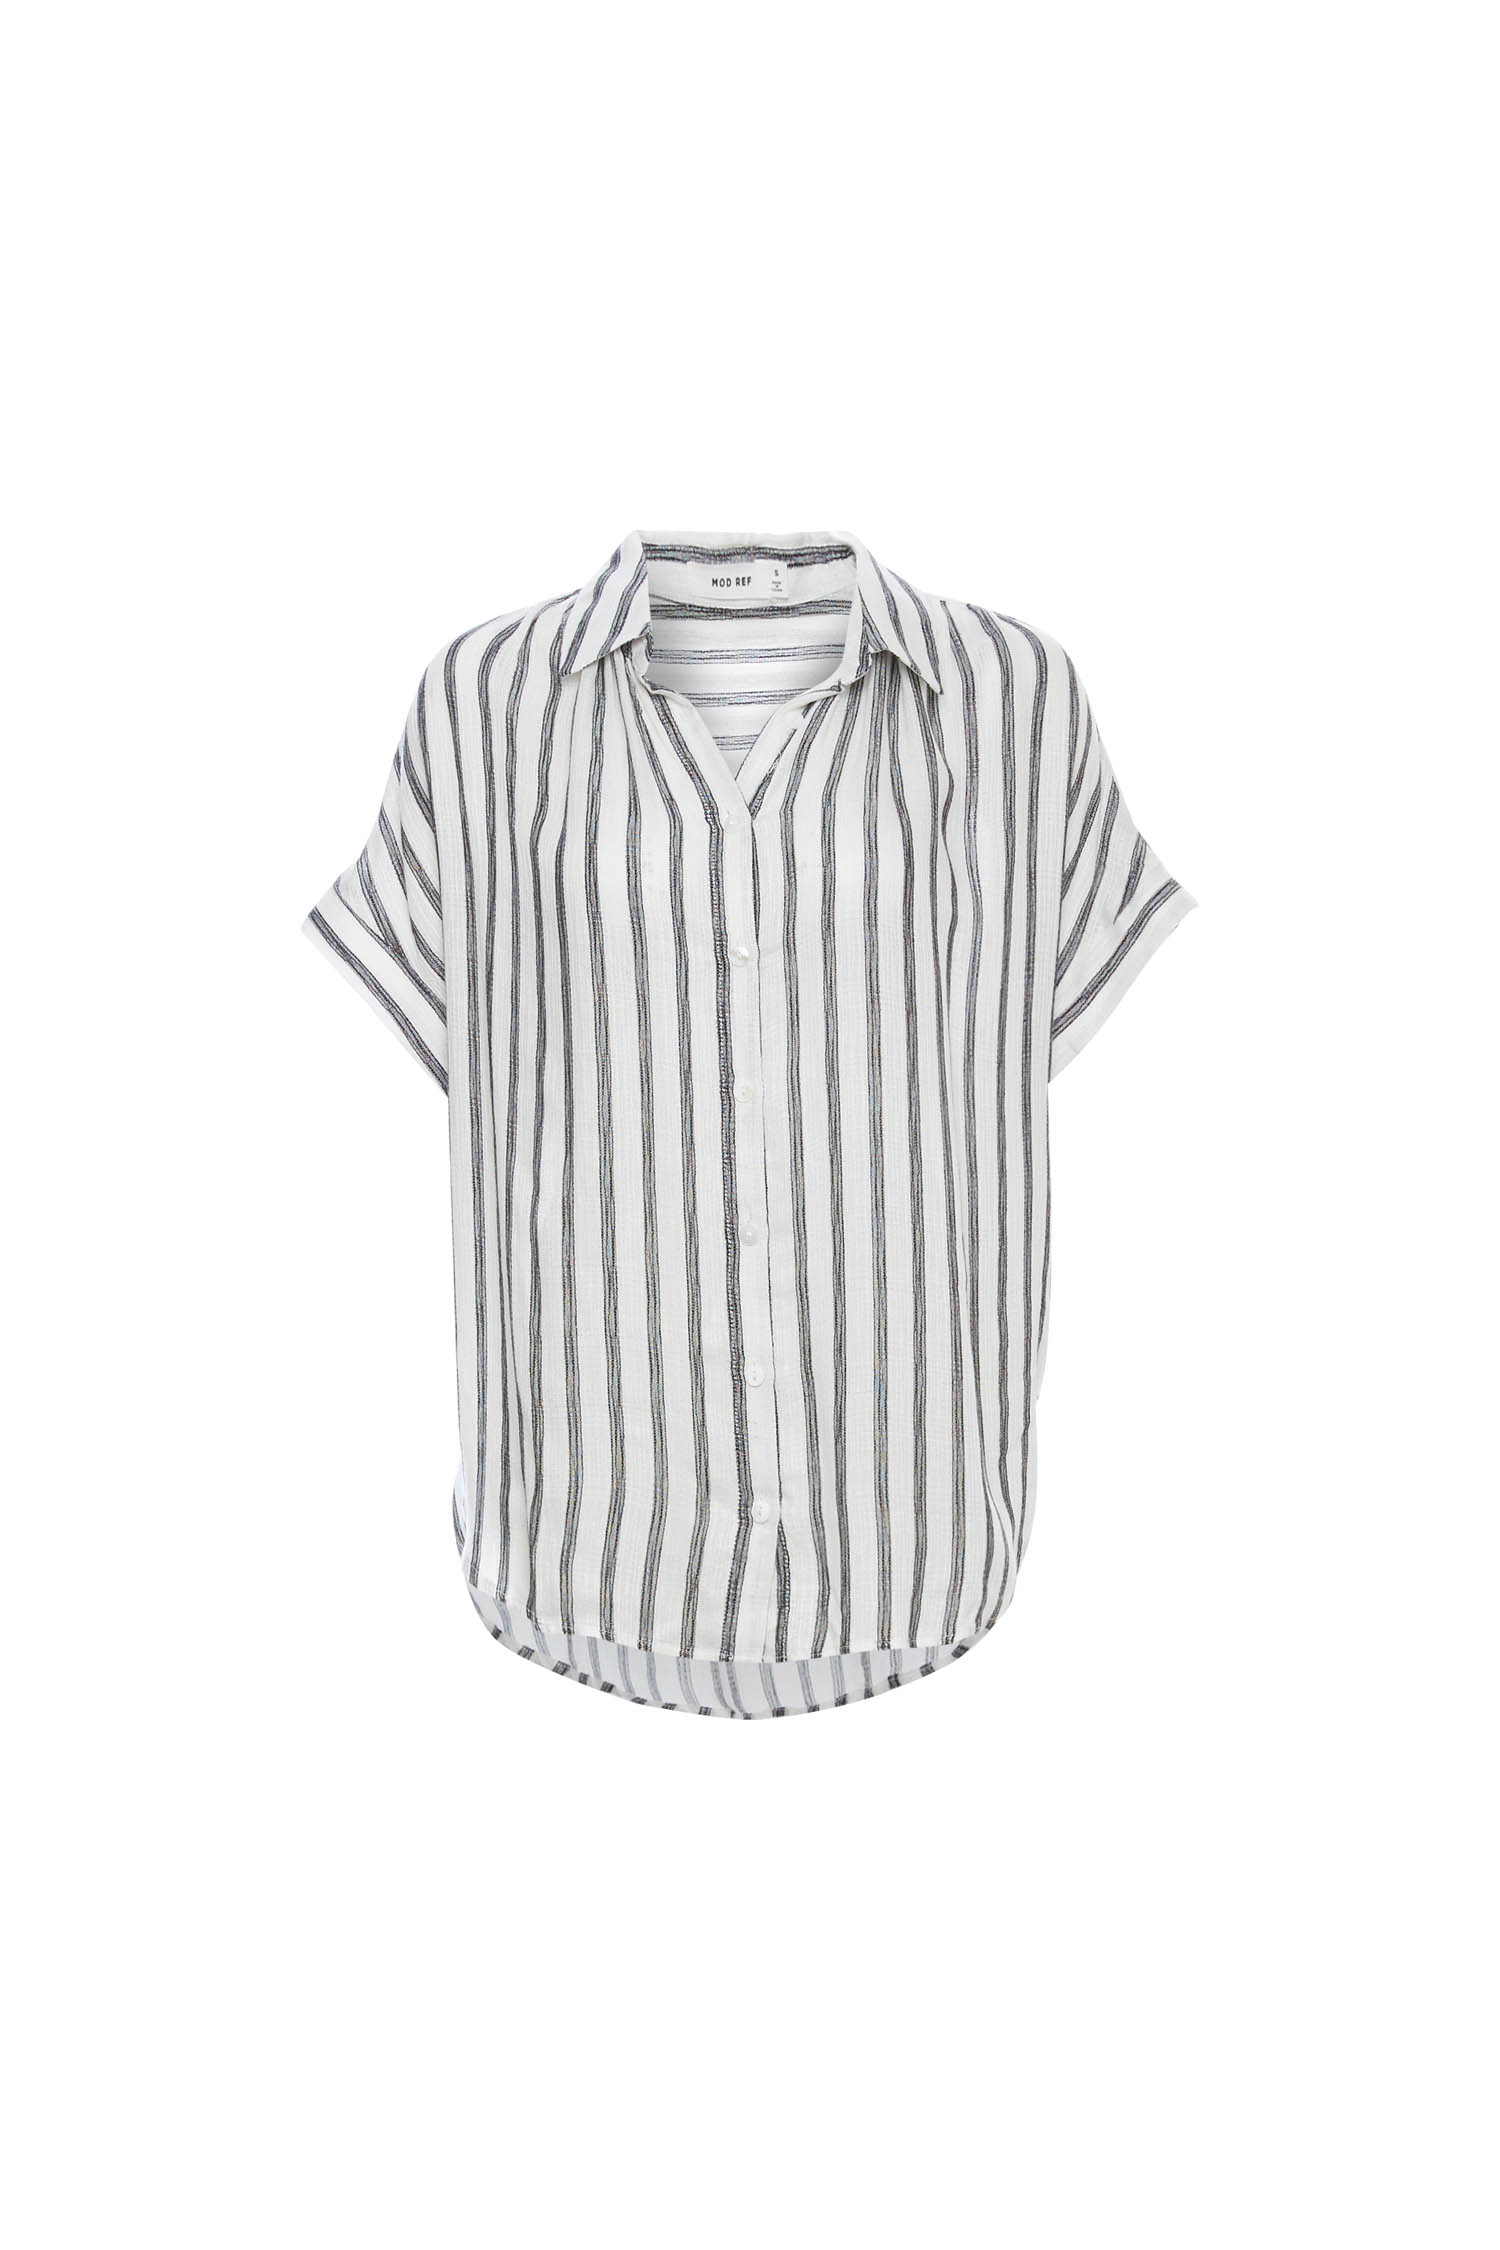 Mod Ref Button Up Striped Top in White/Black | DAILYLOOK